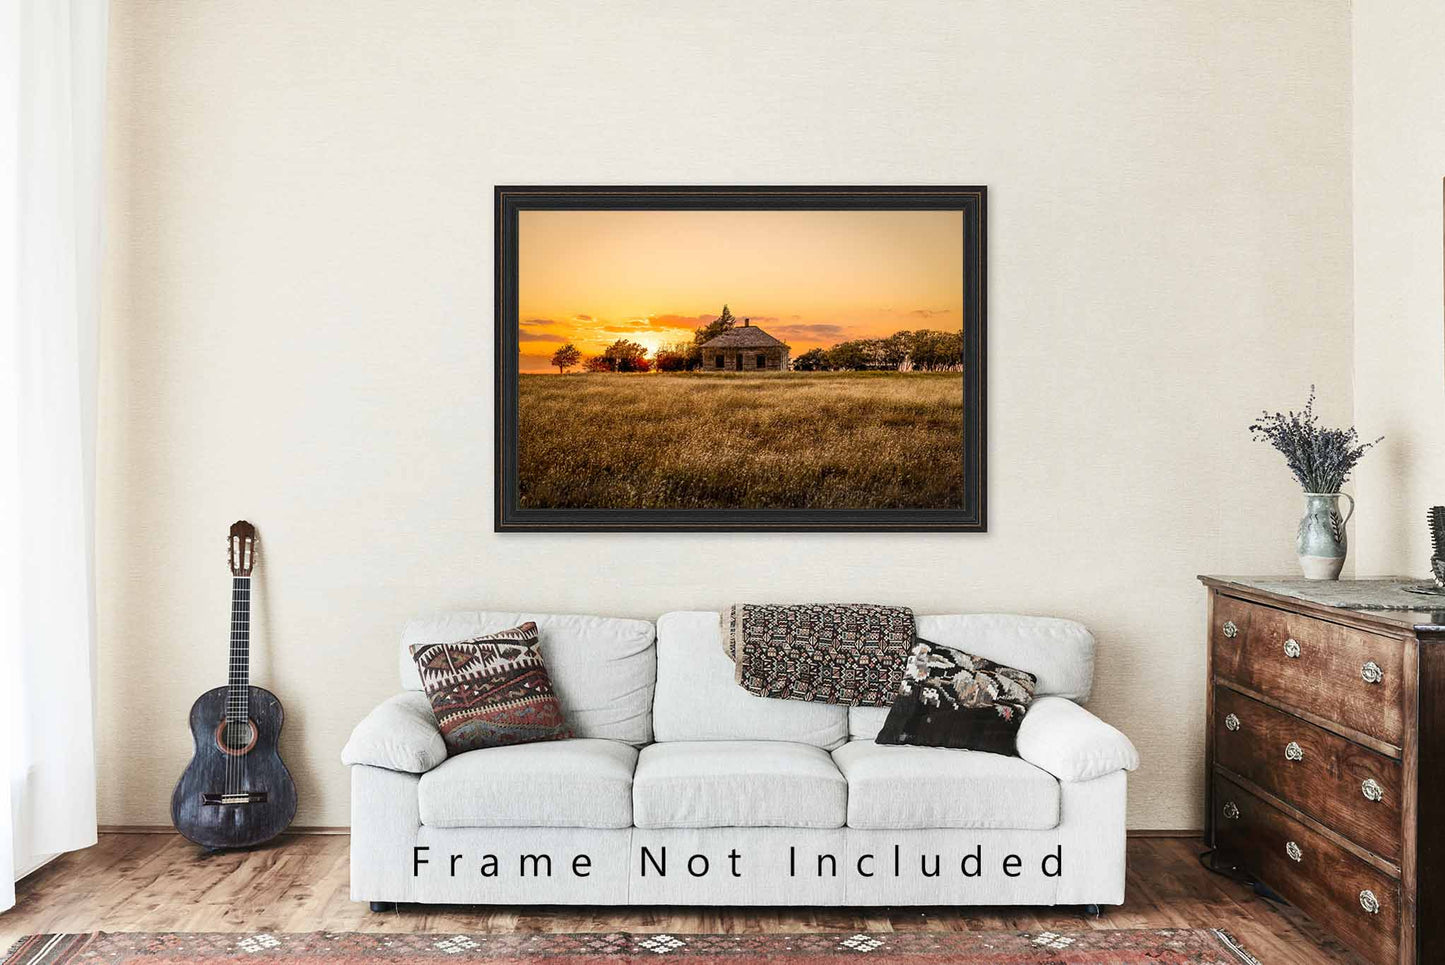 Rustic Country Photography Print - Picture of Abandoned House and Prairie Grass at Sunset in Oklahoma - Wall Art Photo Farmhouse Decor